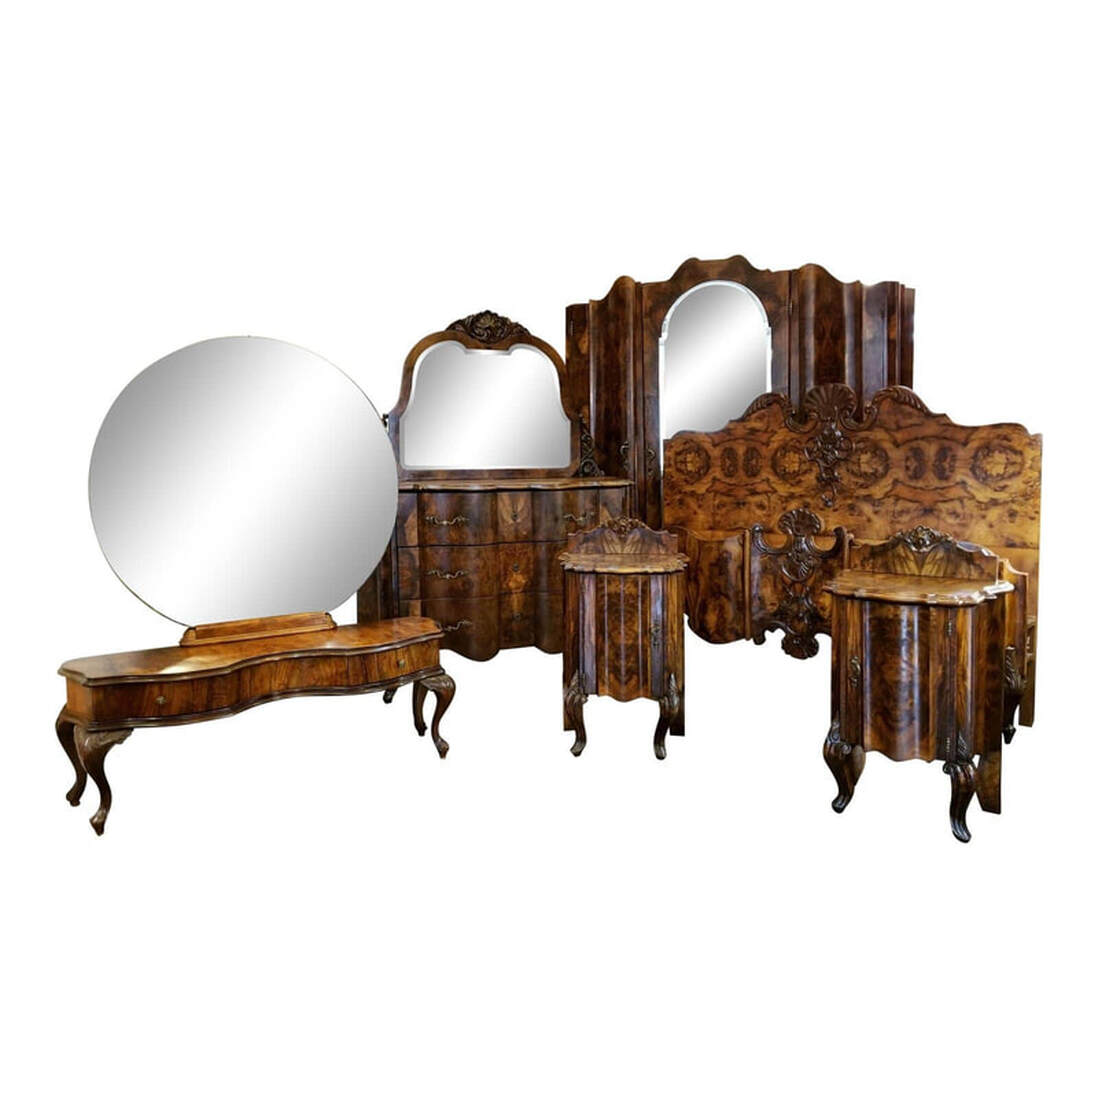 Italian Olive Wood Neo-Rococo Venetian Baroque Six Piece Bedroom Suite  Scarce and stunning six-piece bedroom suite in the Italian Neo-Rococo / Venetian Baroque styles popular throughout Europe in the mid-to-late 19th century.  This suite is made with Italian burled olive wood veneers, except for the dressing table constructed with burled walnut veneers.  We attribute the manufacture of these furniture pieces to Fratelli Testolini; also known as the Testolini Brothers, Testolini Venise, and Testolini Freres Muebles; of Venice, Italy.  Fratelli Testolini was founded by two Italian brothers and became the most highly regarded manufacturers for nearly a century of art furniture, wood carvings, mosaics, marbles, jewellery, Murano art glass, and table glass.  After the deaths of the founders, two cousins inherited the business. One did not care for the business and created a merger for distribution of goods with Antonio Salviati, maker of glass, mosaics, and carved art furniture, and Jesurum. From 1902 through 1906 the business was held by The Venice Art Company of Venice and London and was known as Salviati, Jesurum & Co and as Salviati & Testolini as well as Testolini & Salviati.  After the dissolution of the merger, Marco Testolini attempted to recover the business and maintained one carpentry workshop focused on casting furniture for other companies. Marco could never regain the previous success of the business and gave in to the sale of the workshop.  Between 1847 and the 1902 merger, the Testolini Brothers were extremely successful with their original designs of 